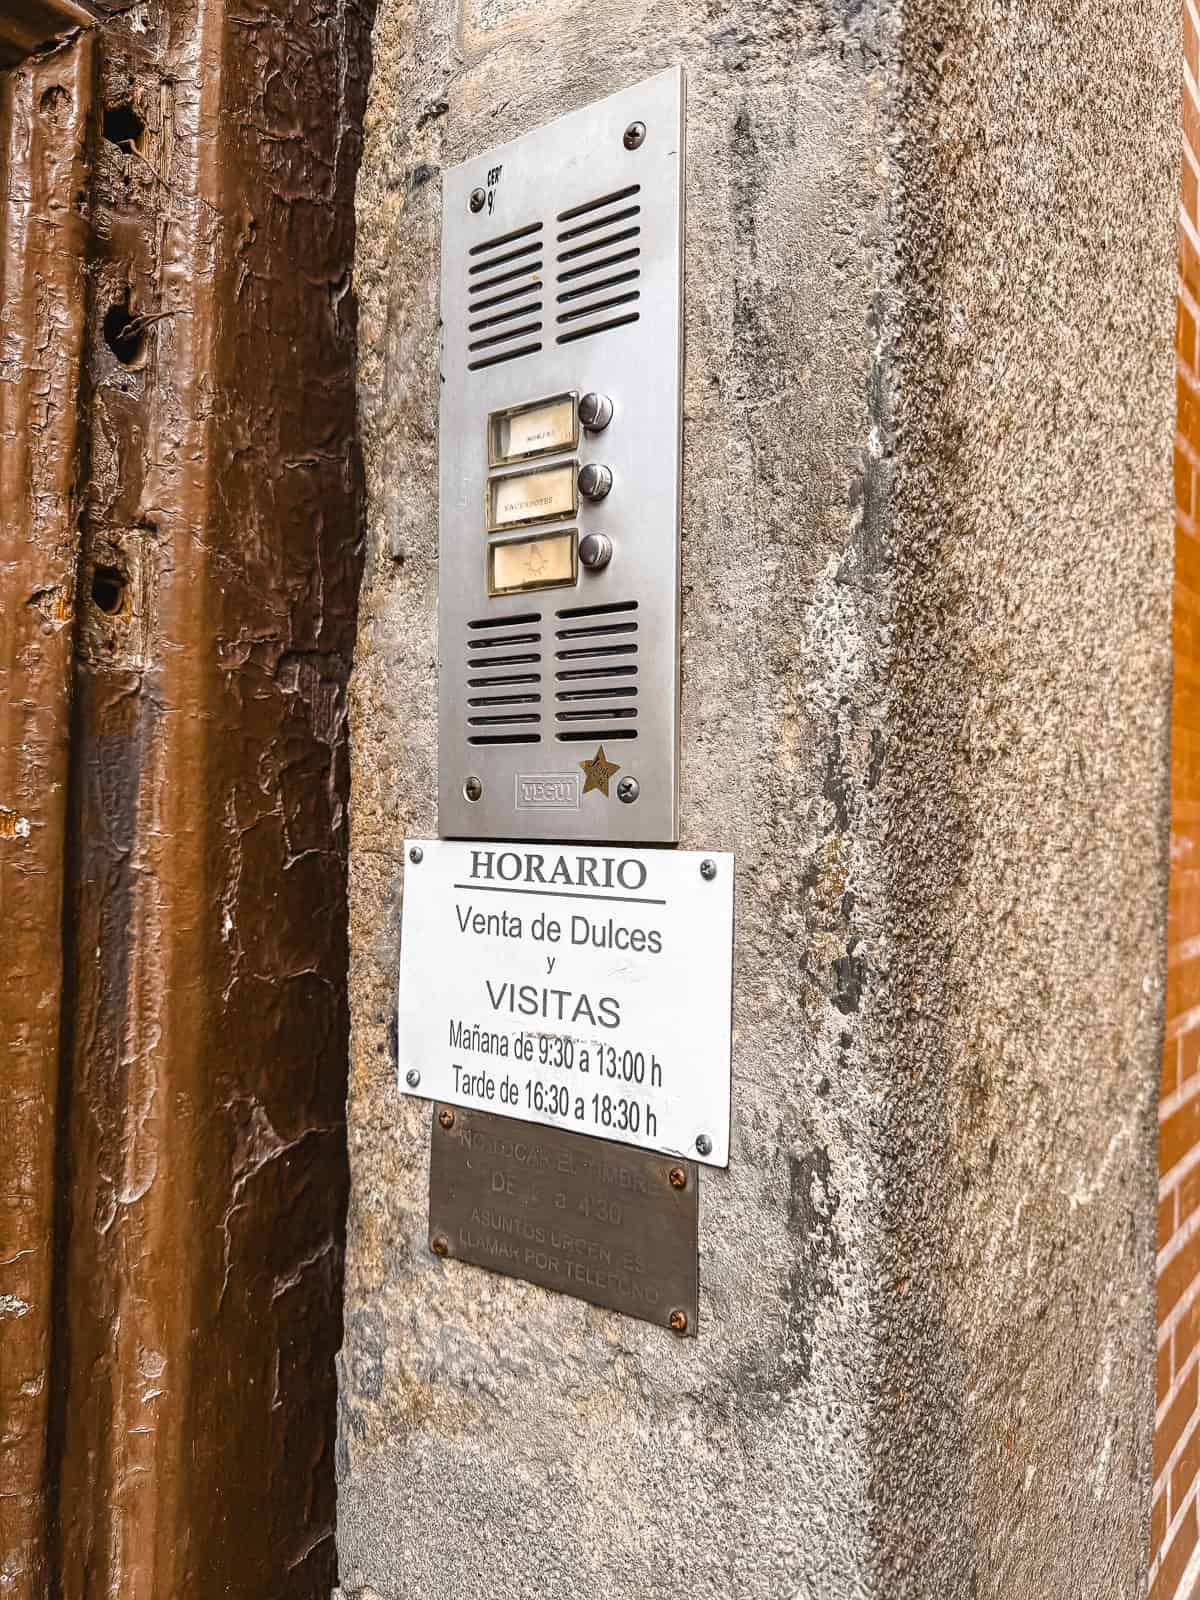 Close-up of a weathered signage plaque reading 'HORARIO Venta de Dulces y VISITAS' beside a door entry intercom system on a textured stone wall